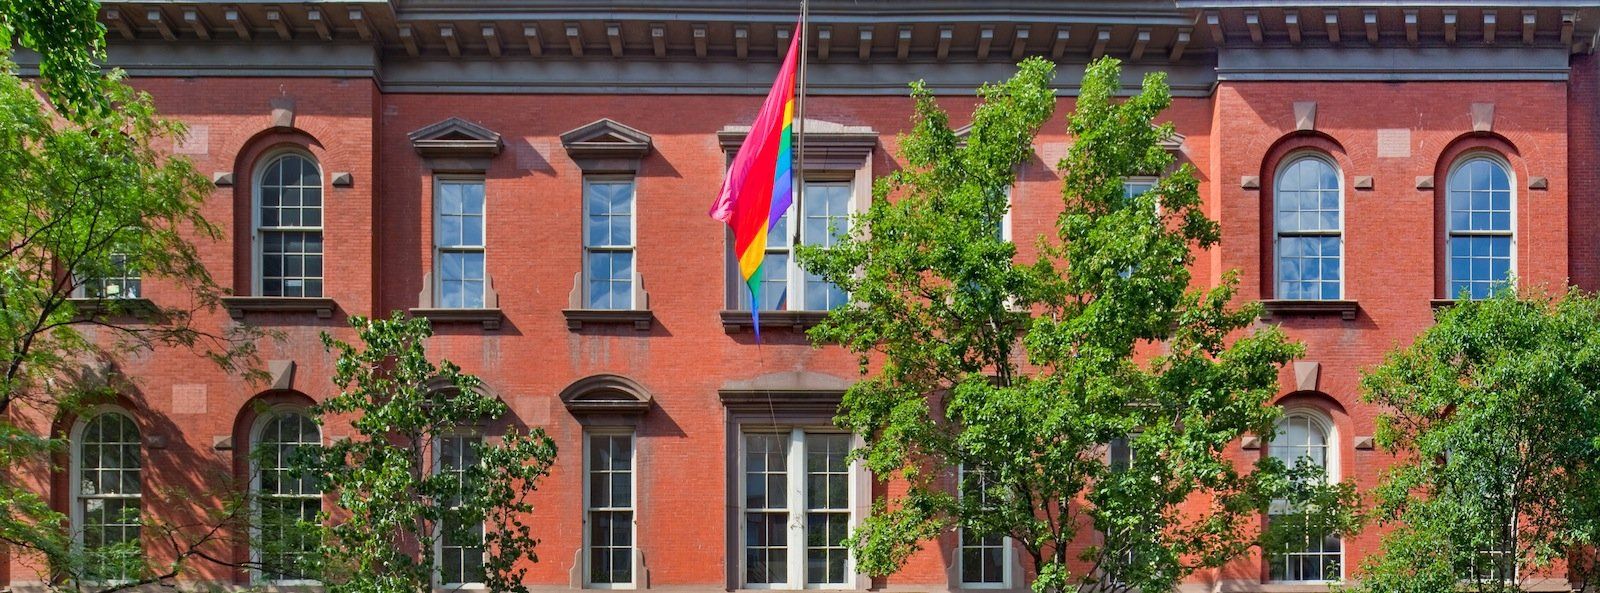 Gay and lesbian building